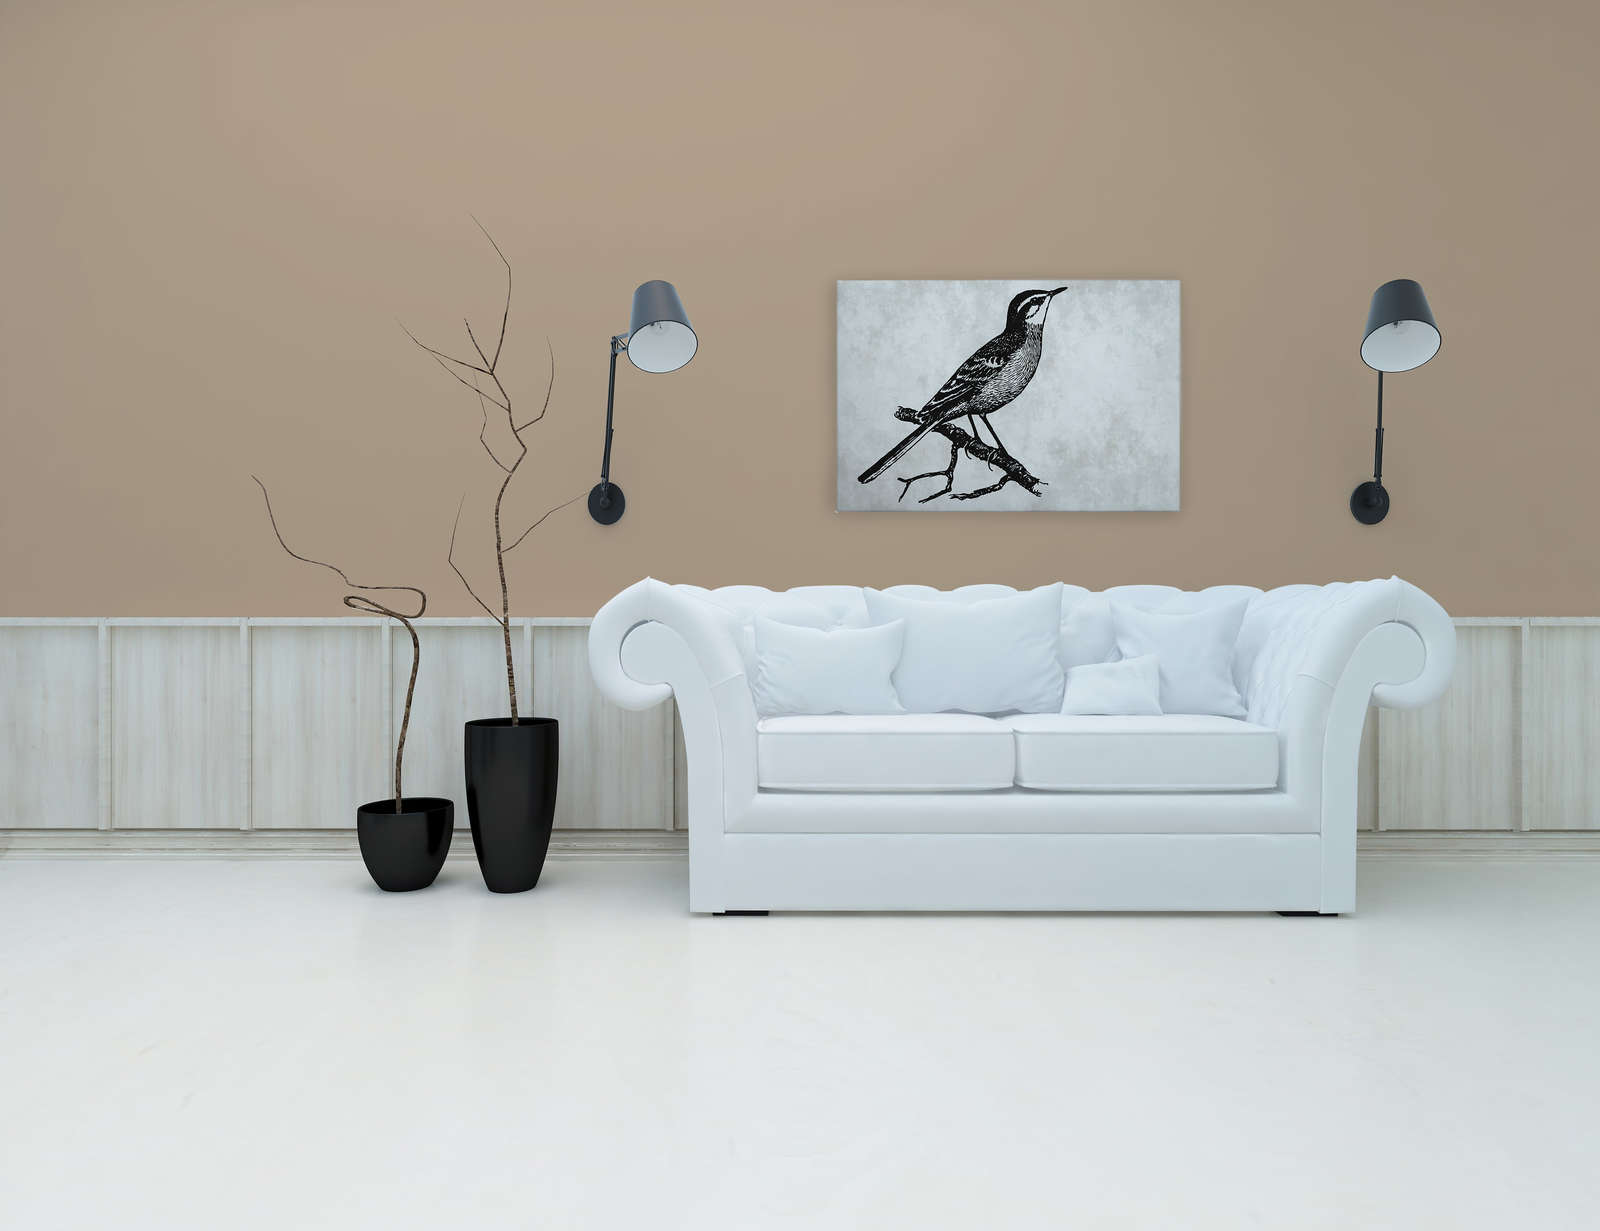             Bird canvas picture in character look with plaster optics - 0.90 m x 0.60 m
        